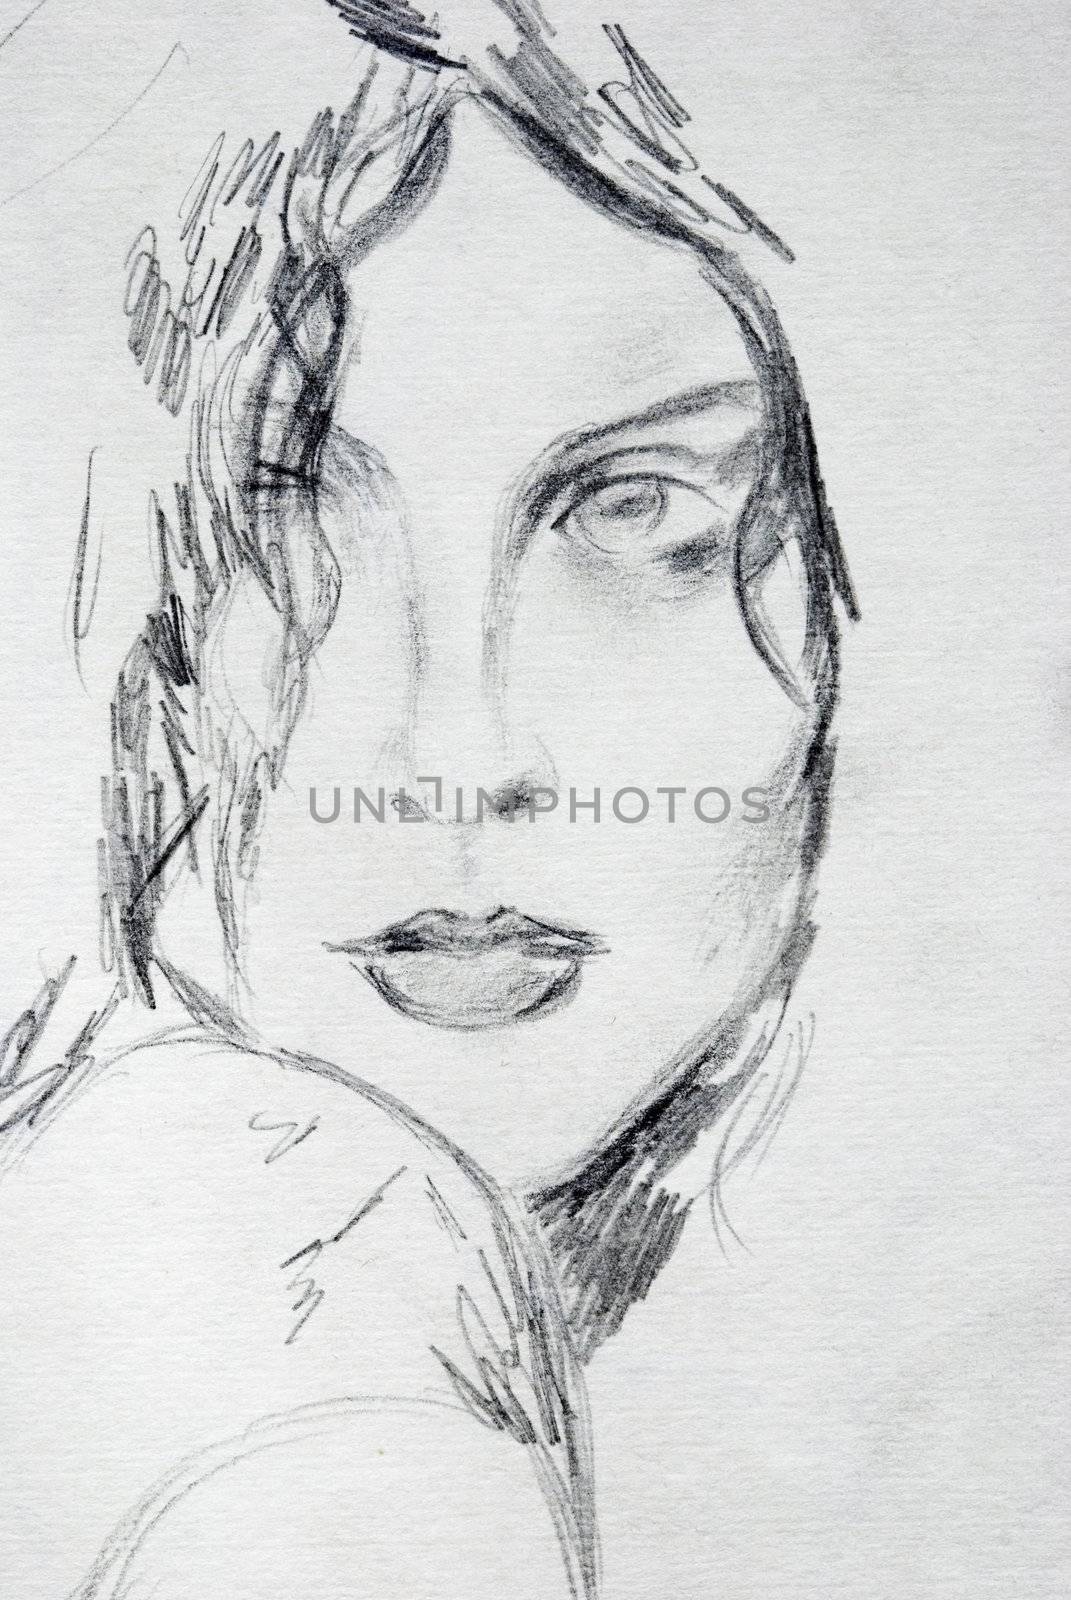 it's scan of my sketch  by my imagination